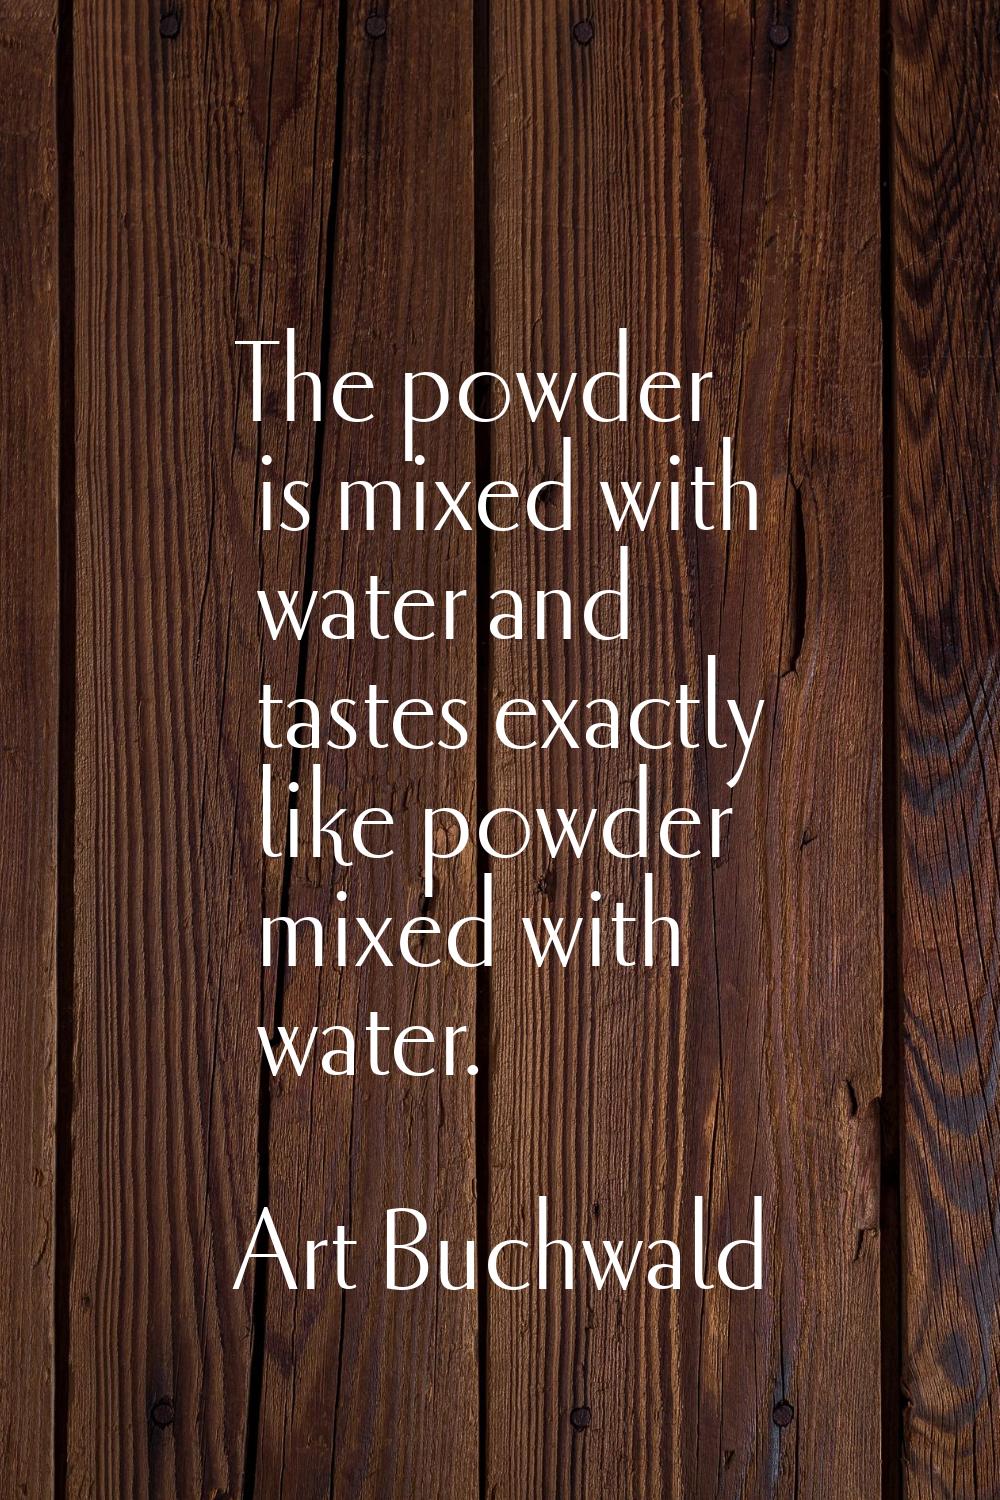 The powder is mixed with water and tastes exactly like powder mixed with water.